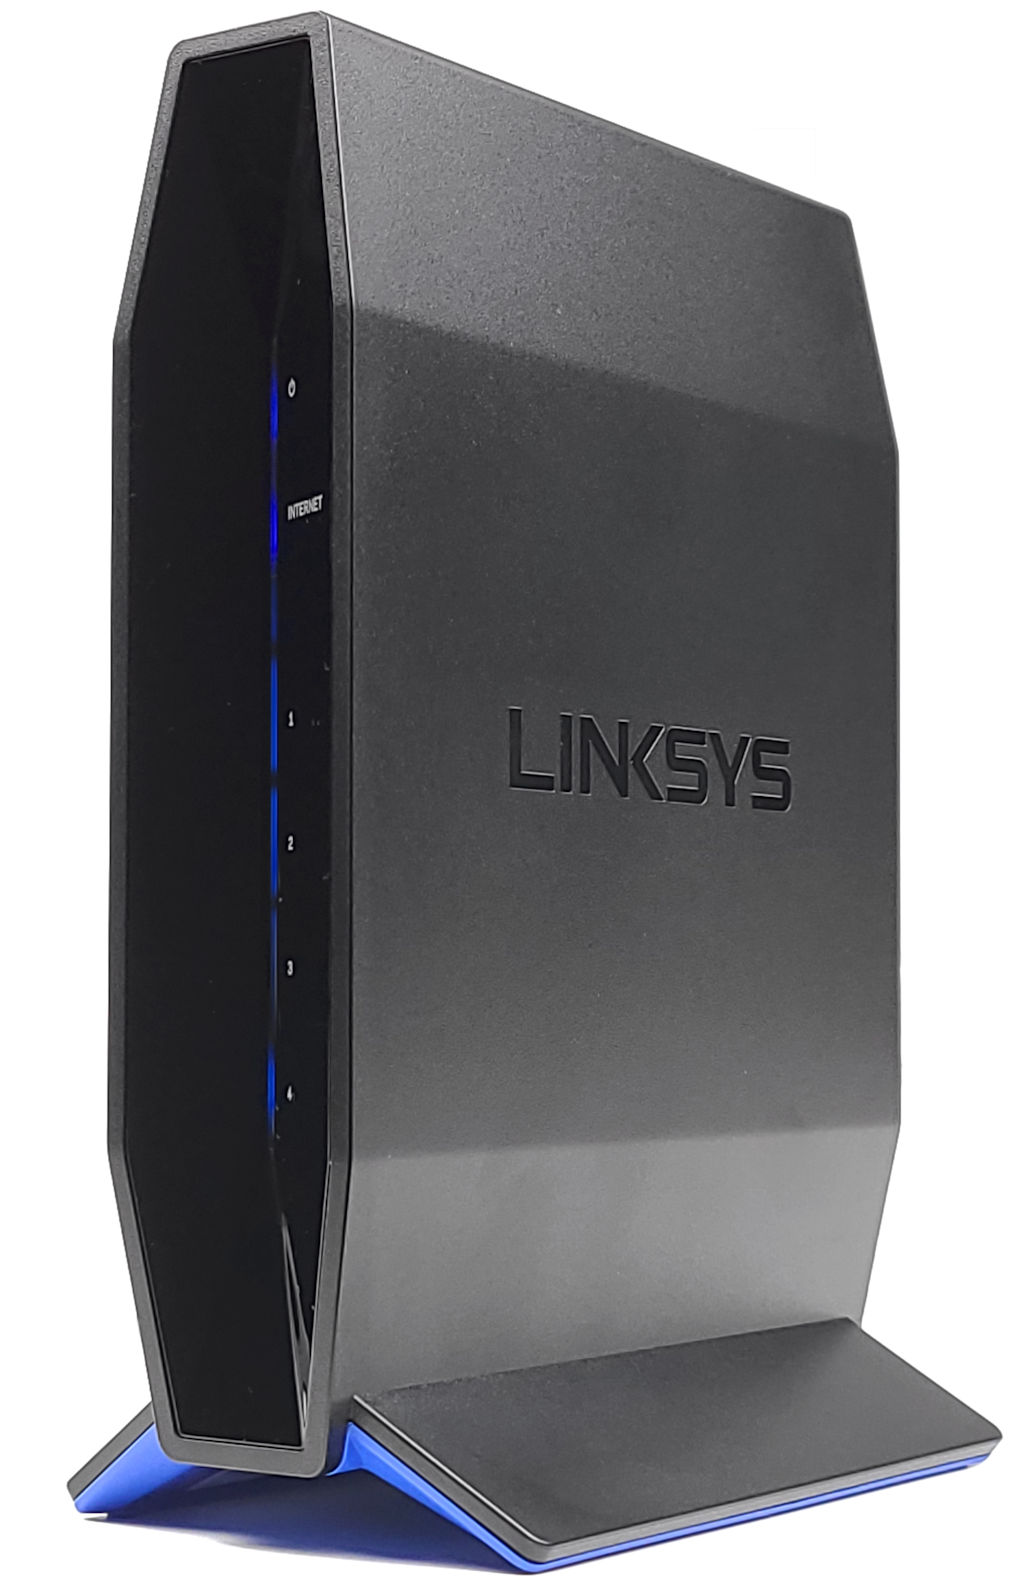 LINKSYS E5600 AC1200 Router 開箱